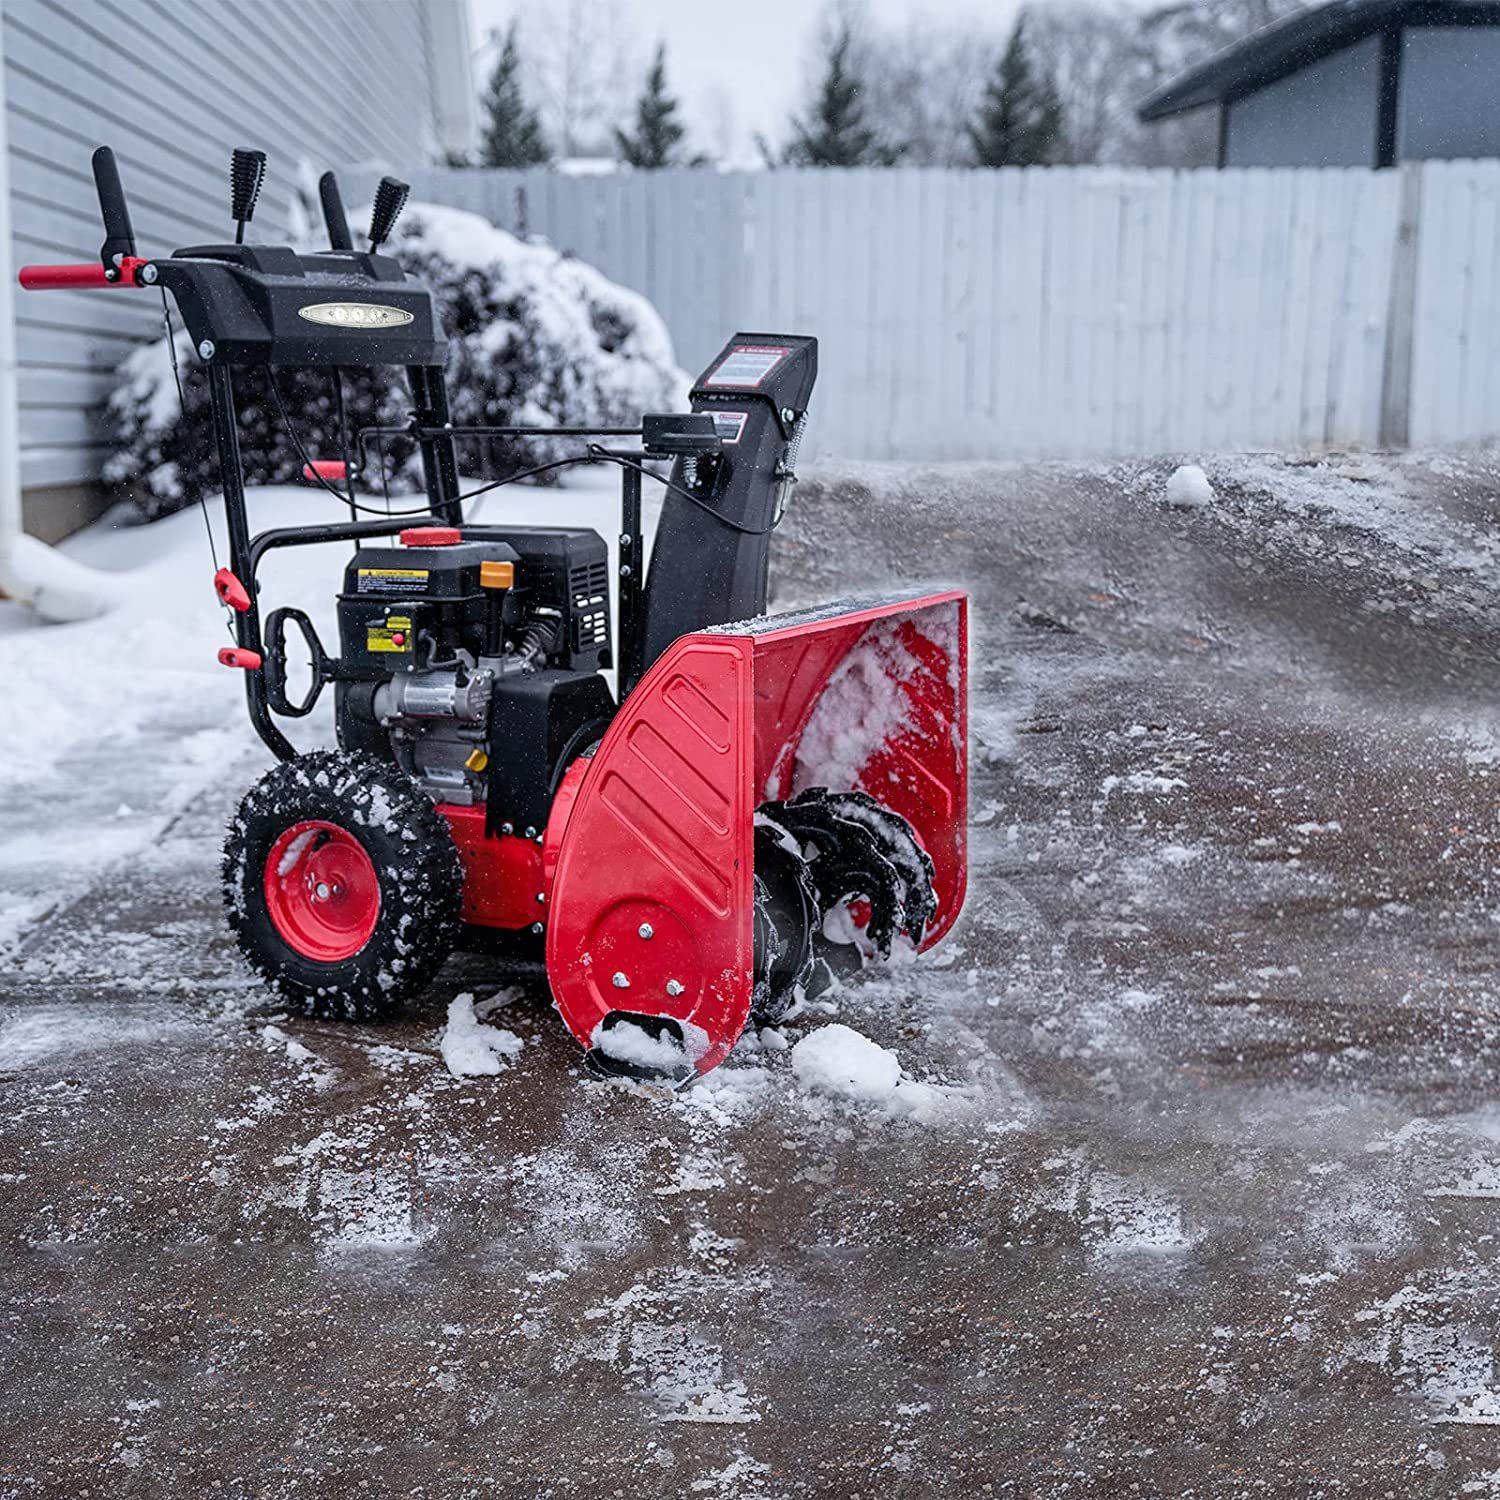 Top-Rated Single and Two-Stage Gas Snow Blowers for Efficient Snow Removal